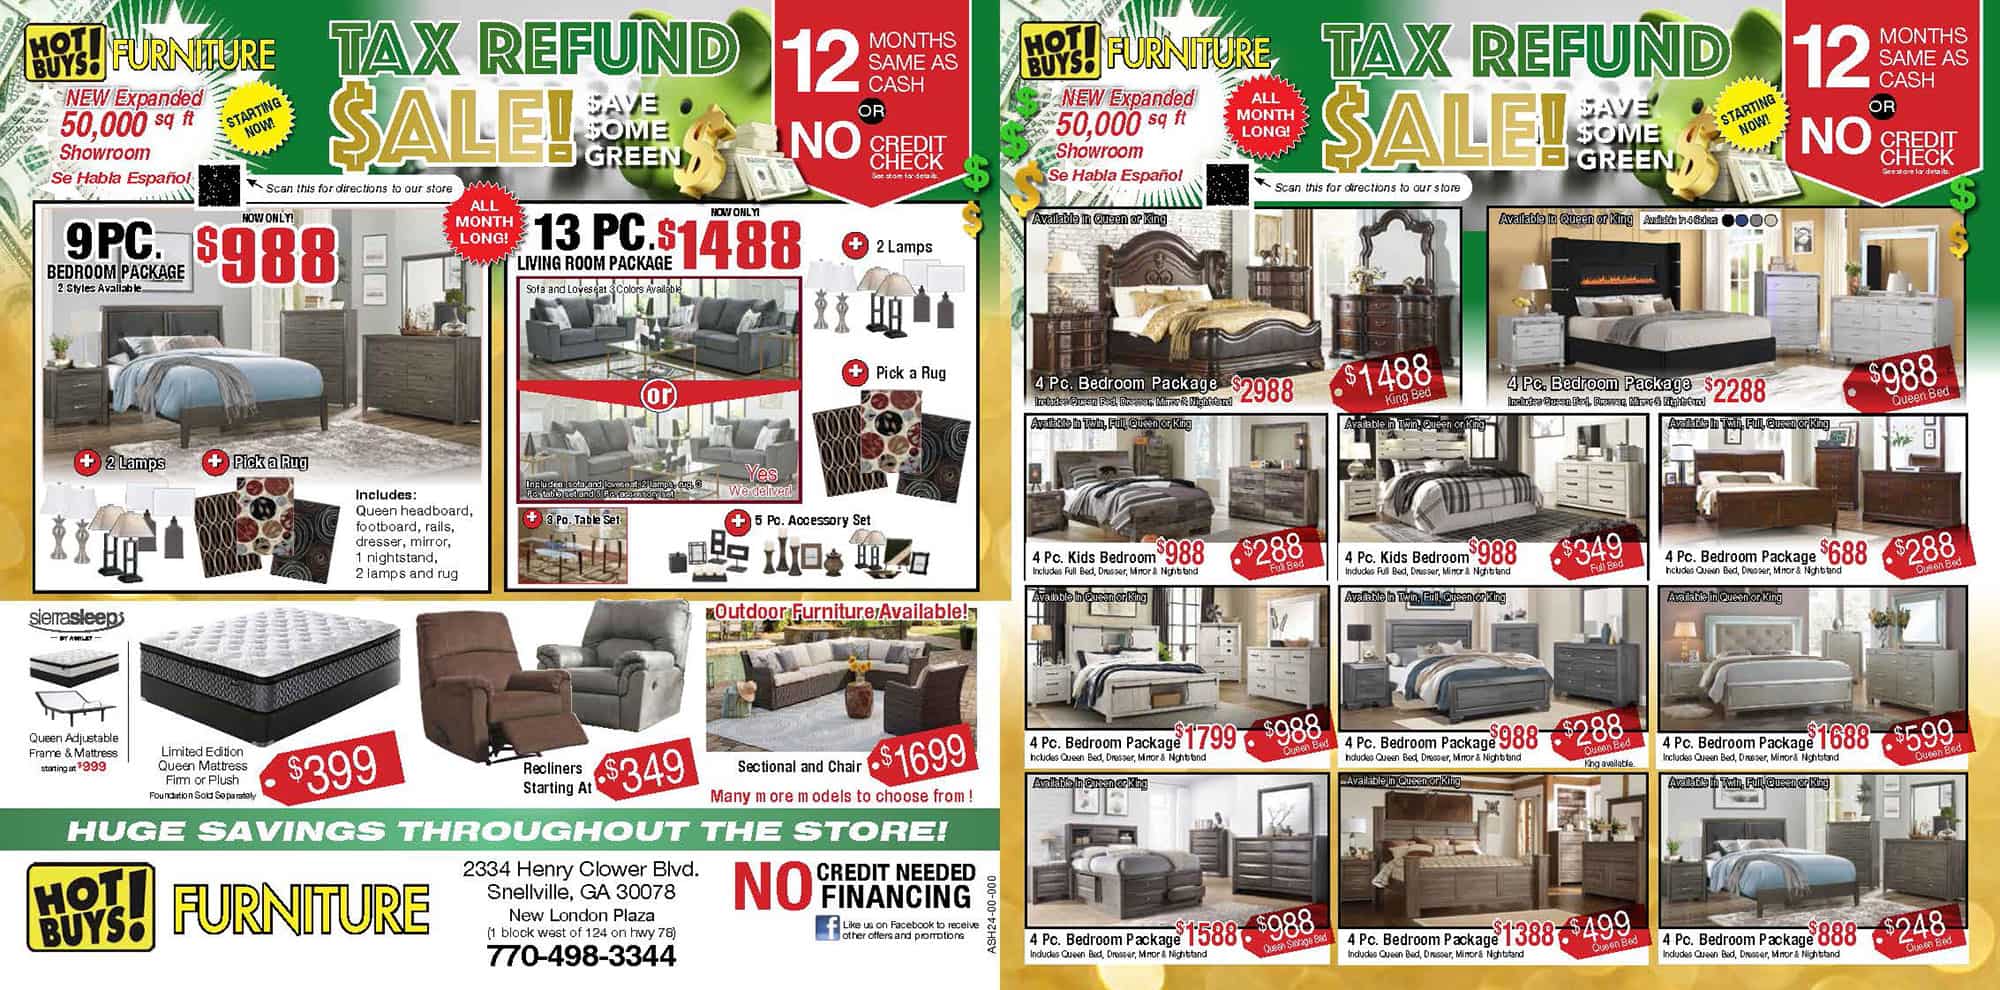 Tax Refund Sale - Shop In-Store Today